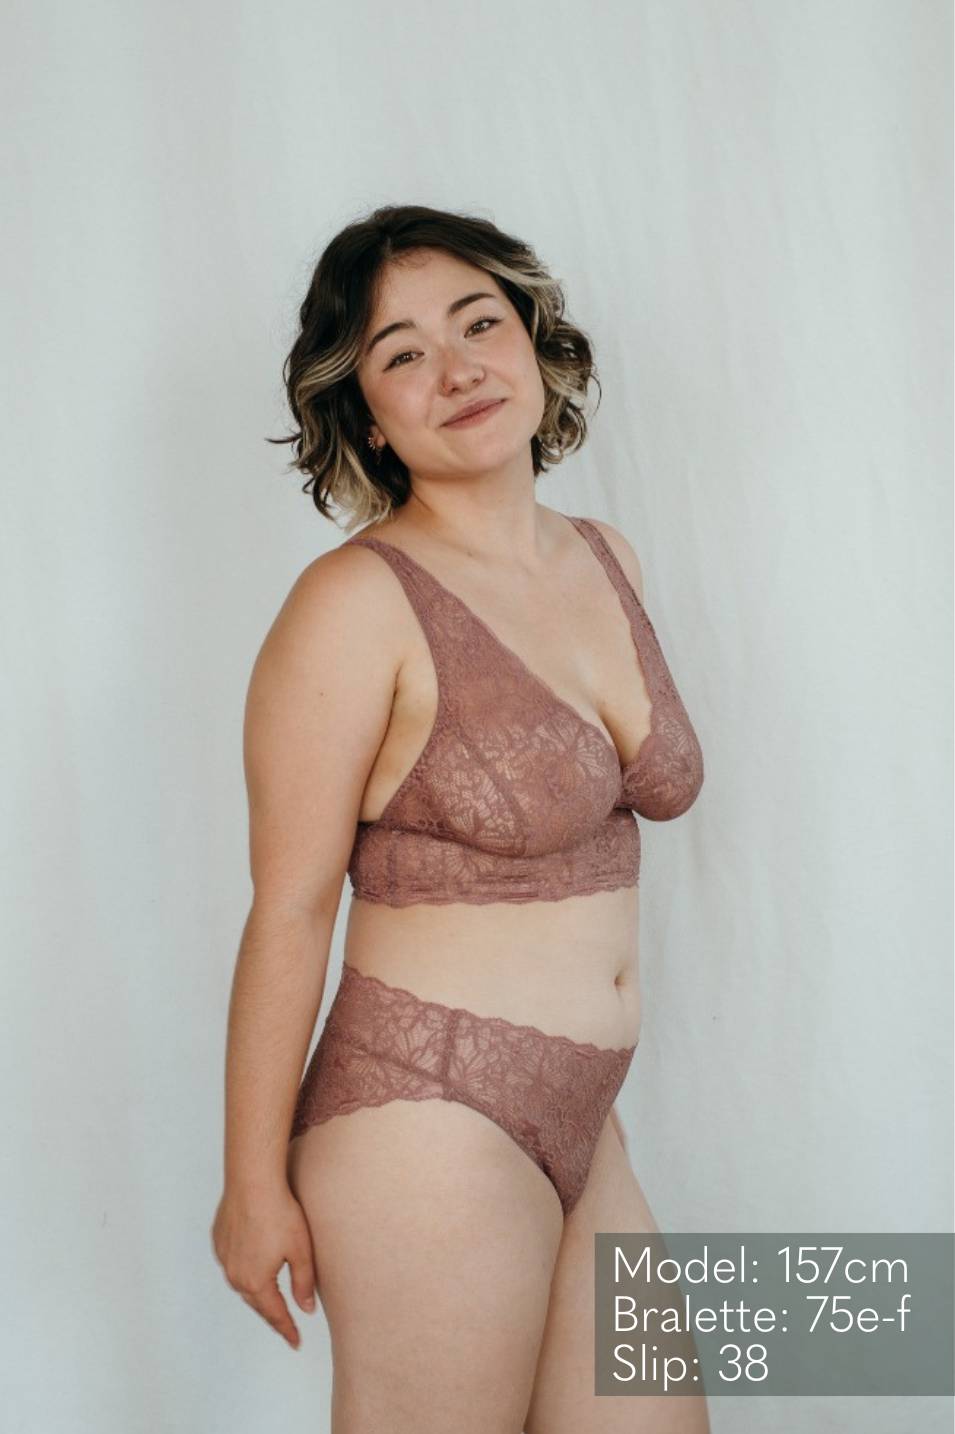 Bralette and slip from thoughts of september in a beautiful smokey rose.